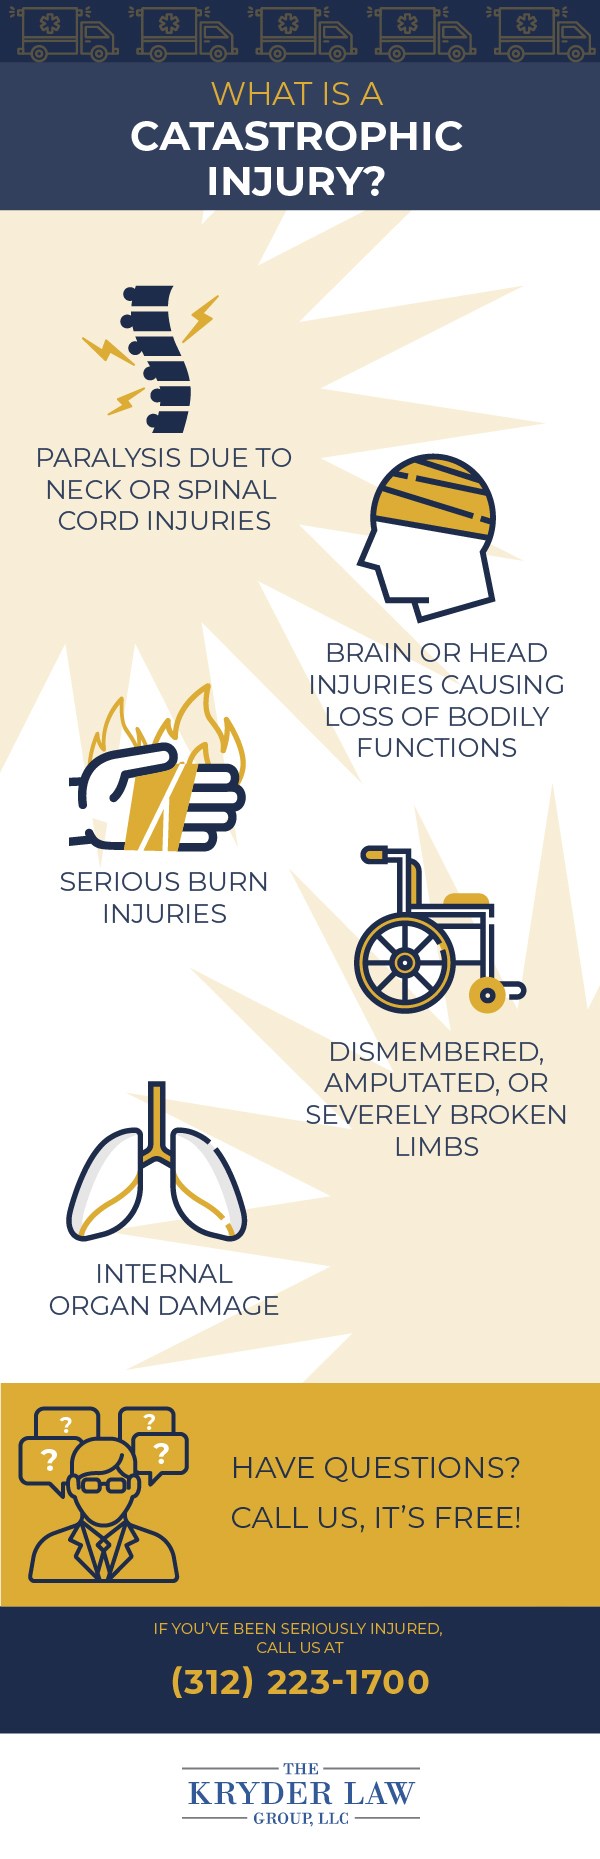 What Is a Catastrophic Injury Infographic